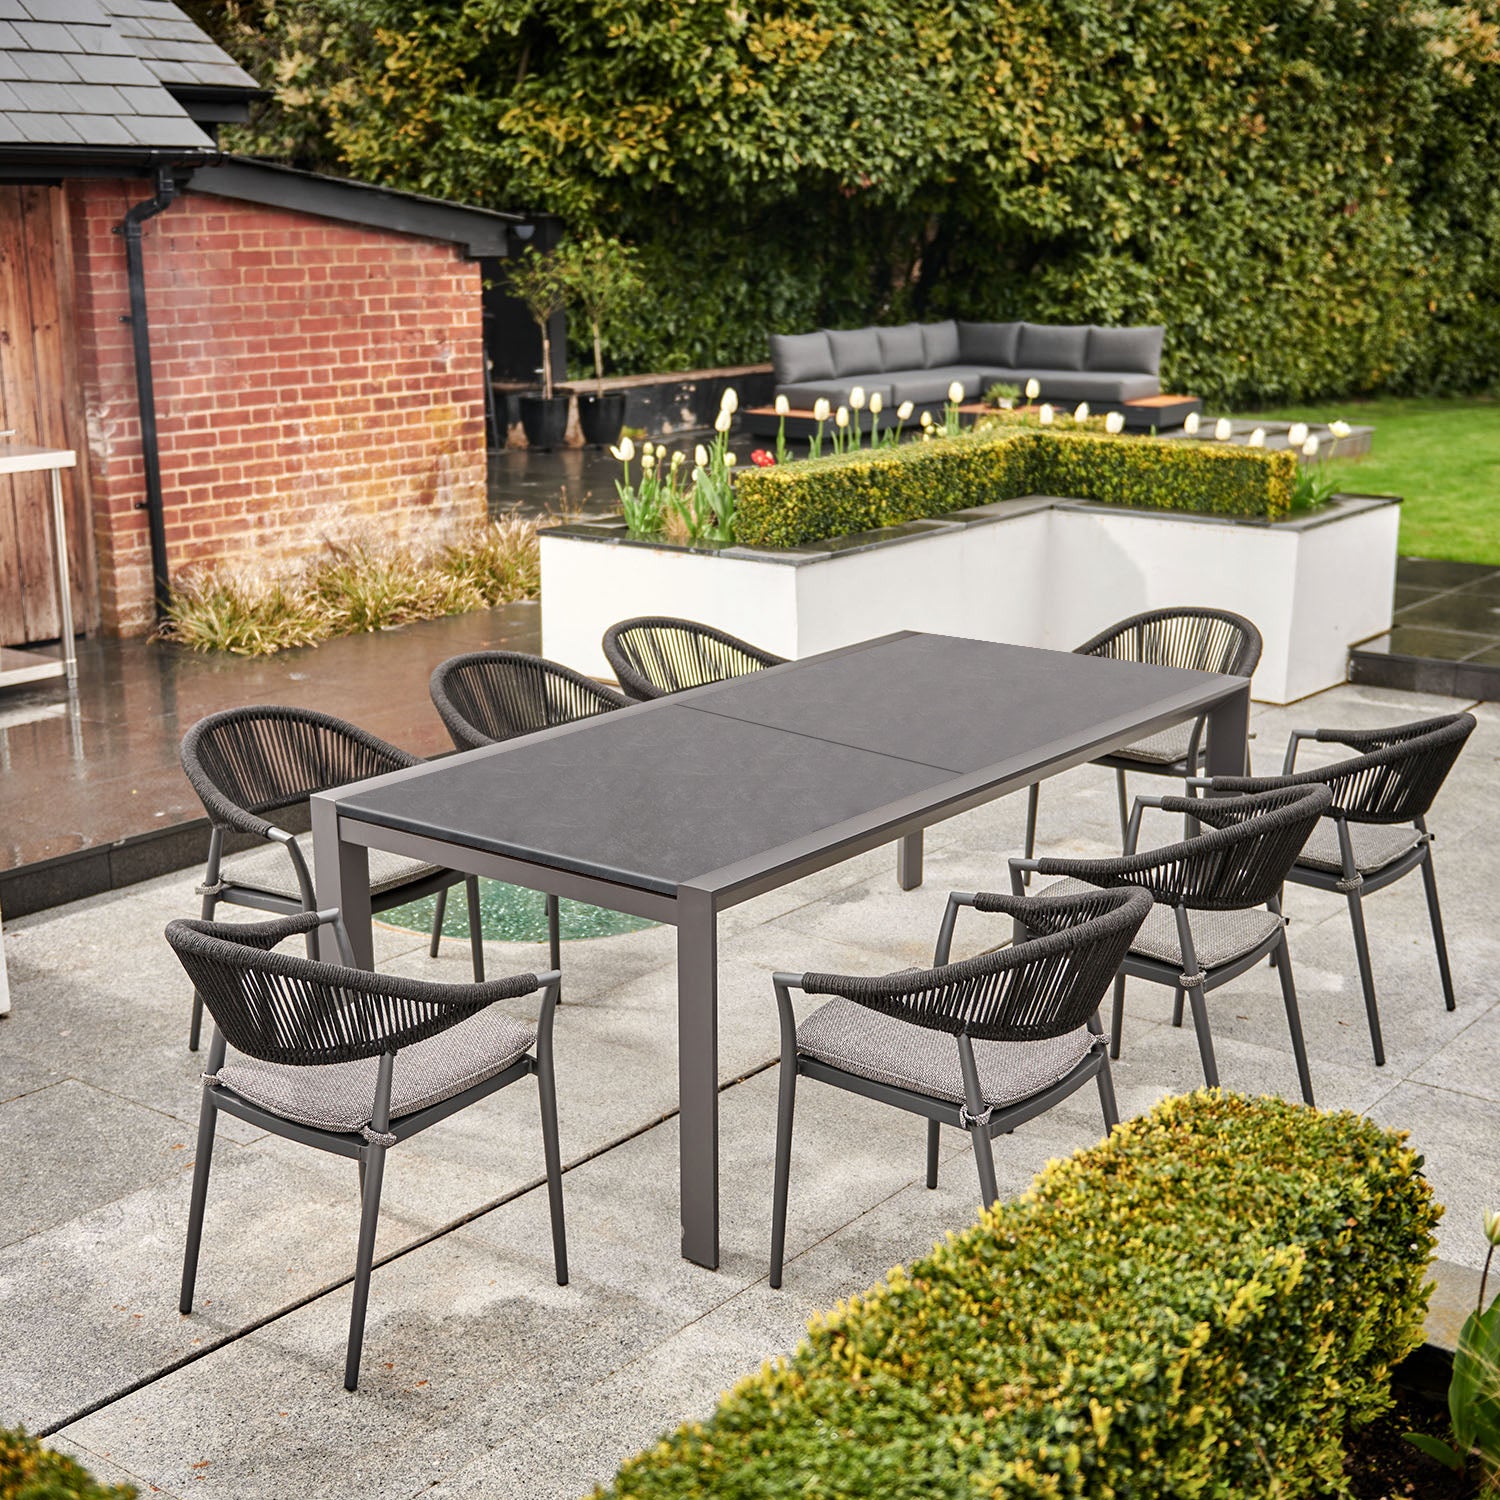 Cloverly 10 Seat Rectangular Extending Dining Set with Ceramic Table in Charcoal